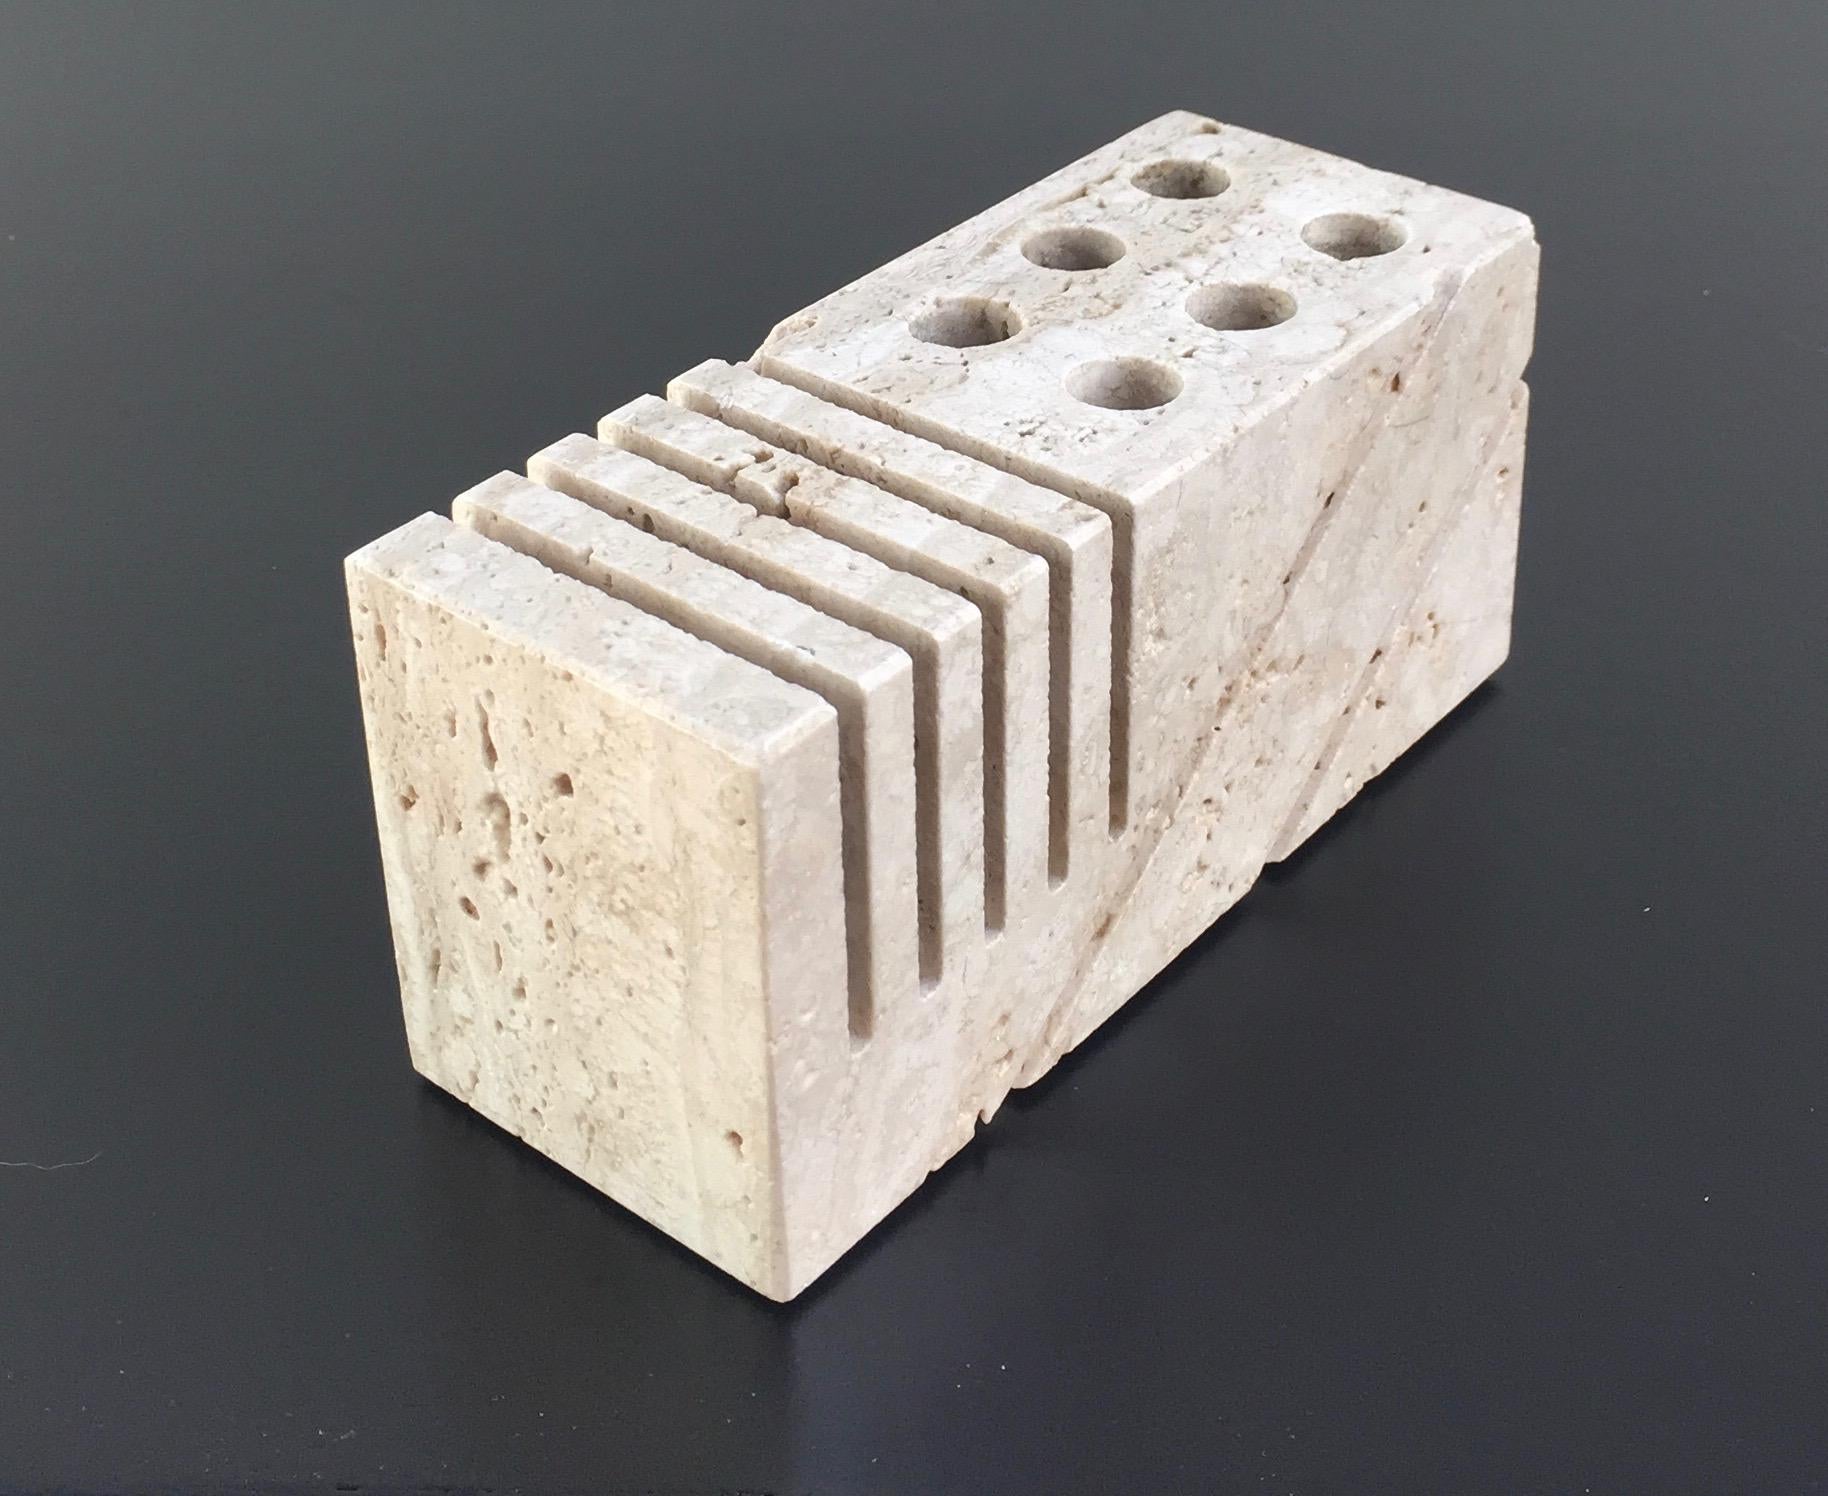 Travertine letter holder also holds pens and pencils and is a beautifully grained travertine with a very natural form.